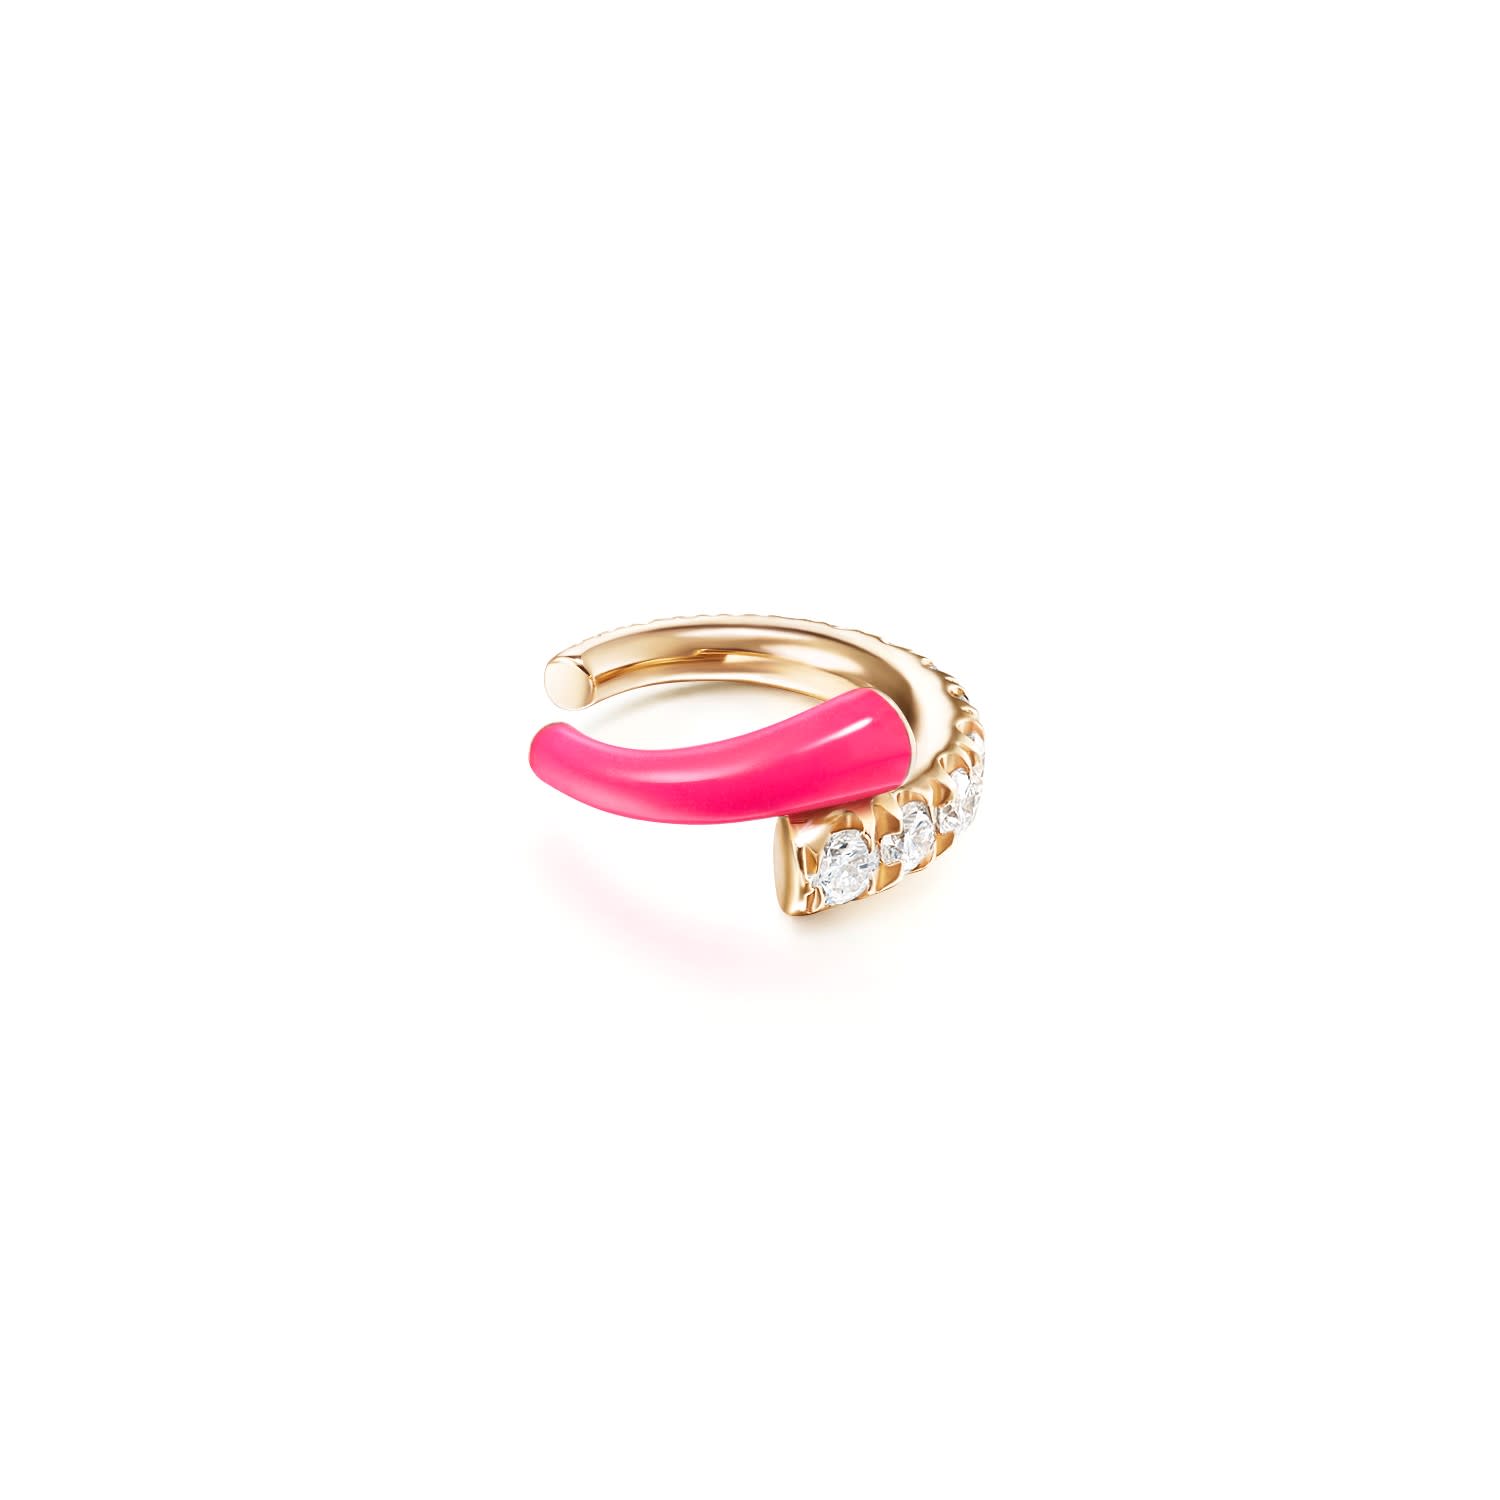 Lola Ear Cuff in 18K Rose Gold with Neon Pink Enamel and Diamonds